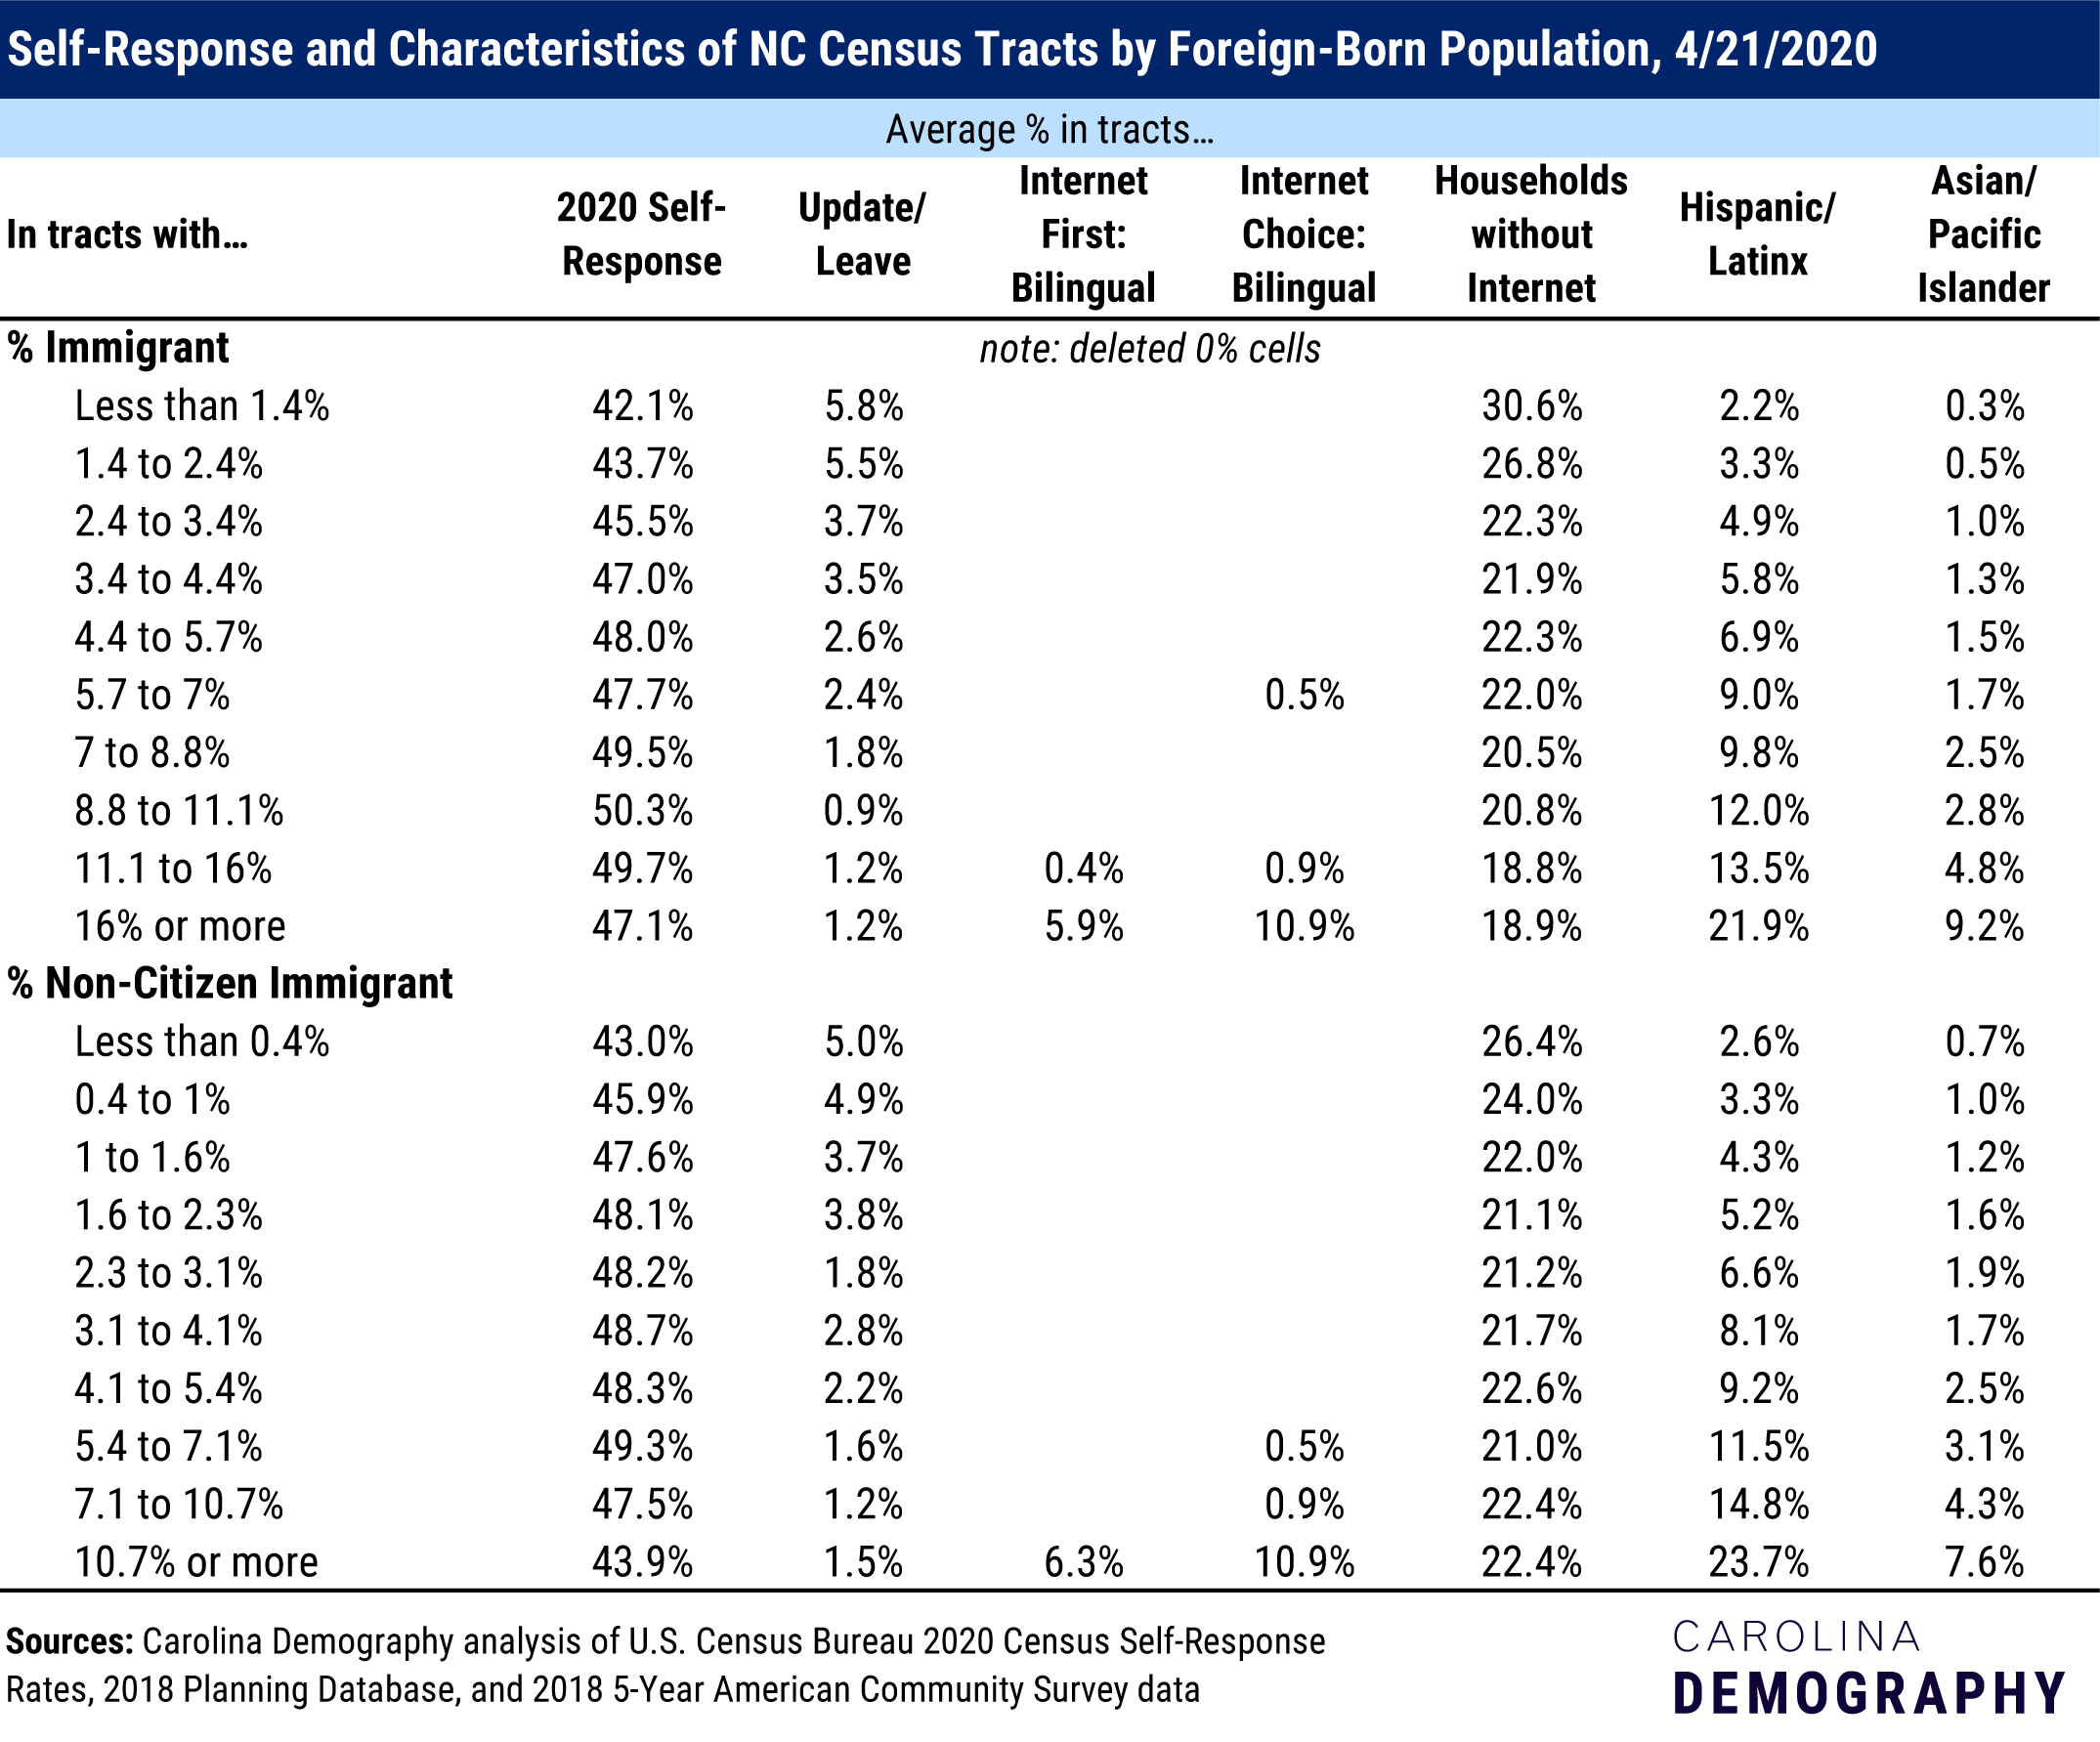 Self-response and characteristics of NC Census tracts by Foreign-born population, 4/21/2020